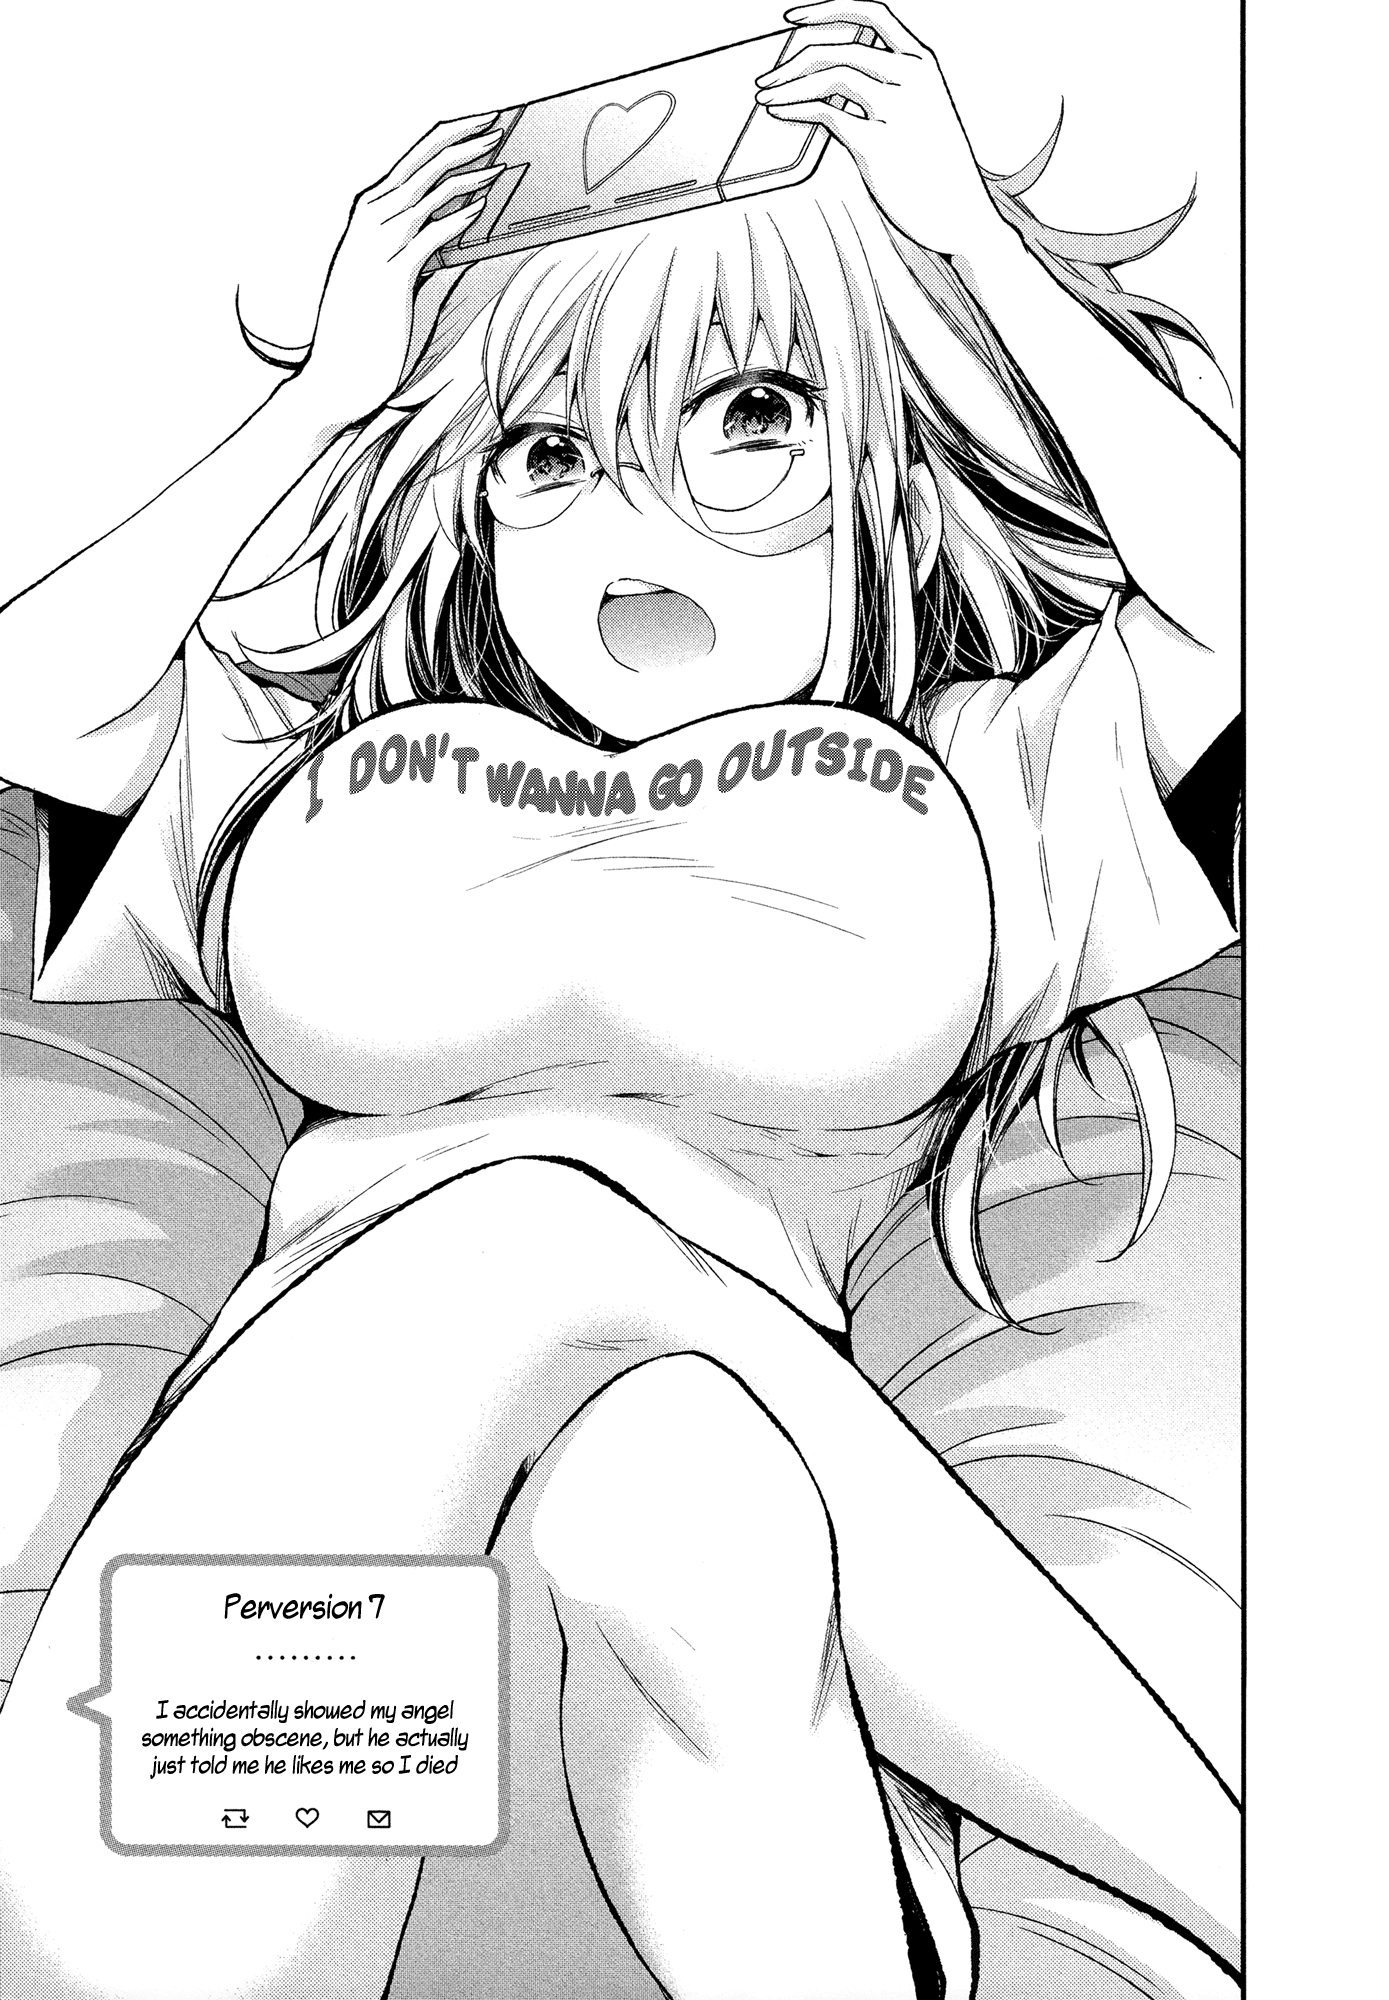 Shingeki No Eroko-San Chapter 7: Perversion 7 – I Accidentally Showed My Angel Something Obscene, But He Actually Just Told Me He Likes Me So I Died - Picture 1